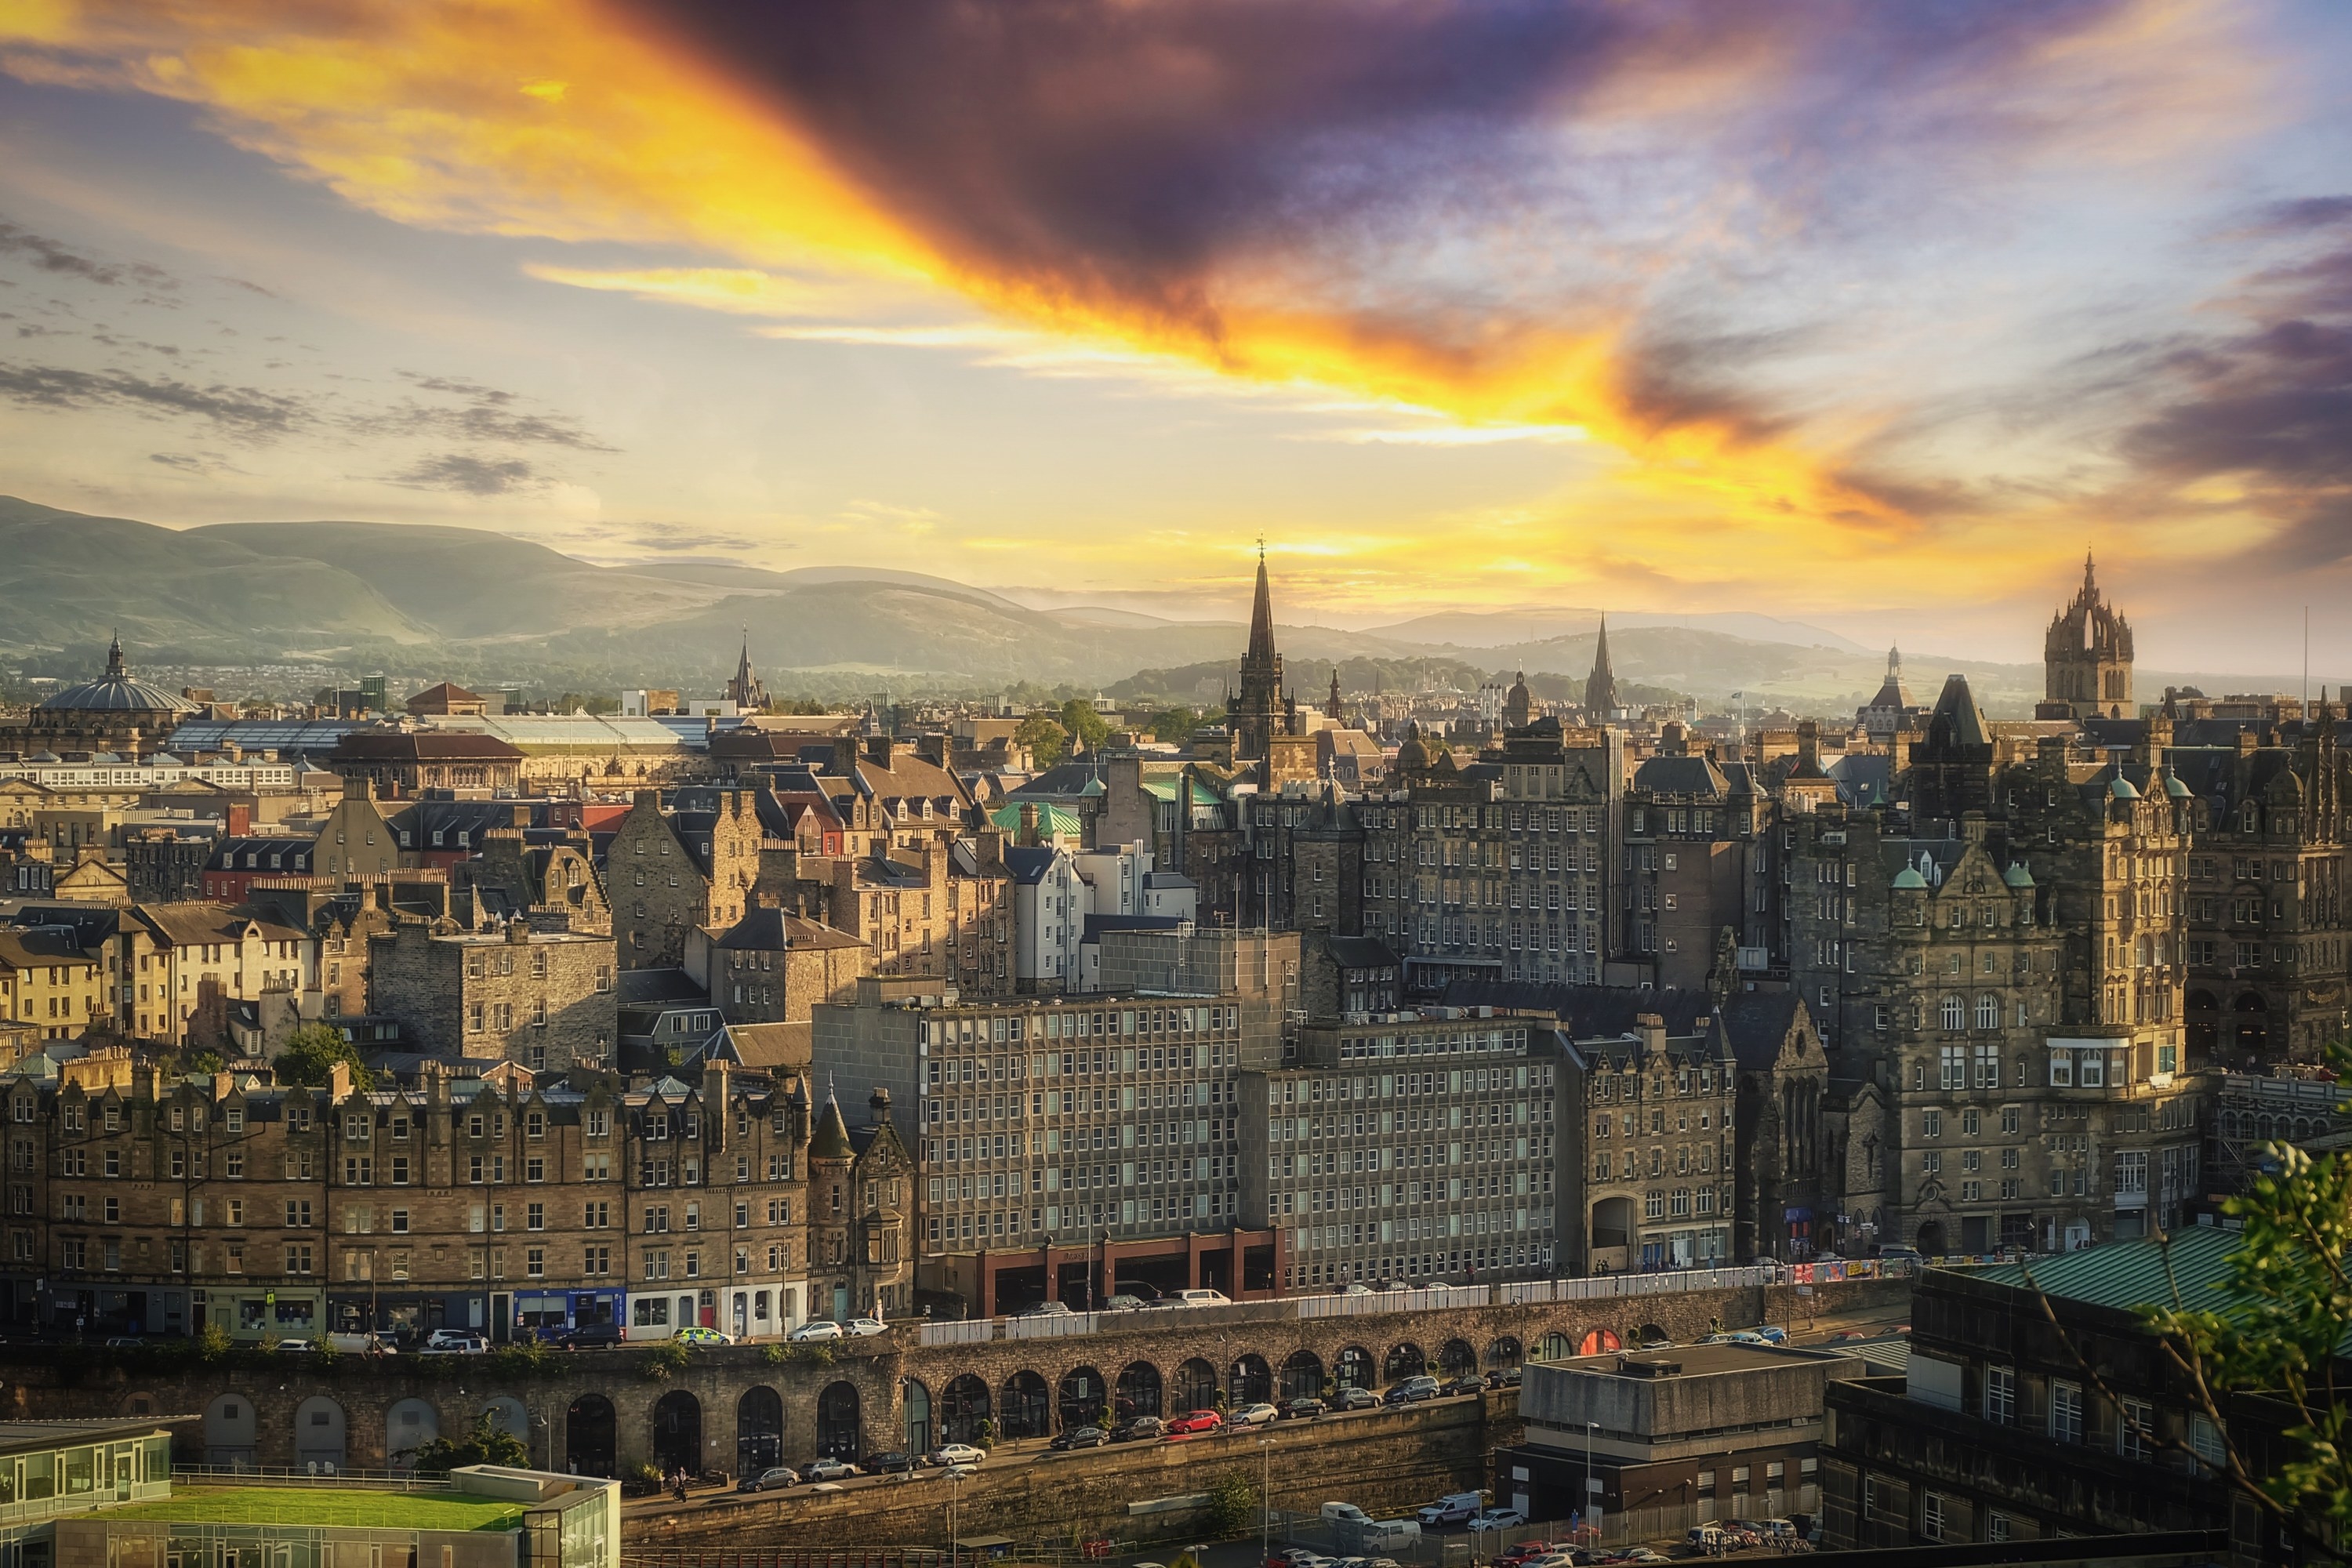 Edinburgh city under colorful sky at sunset time shows various architecture of house and building.